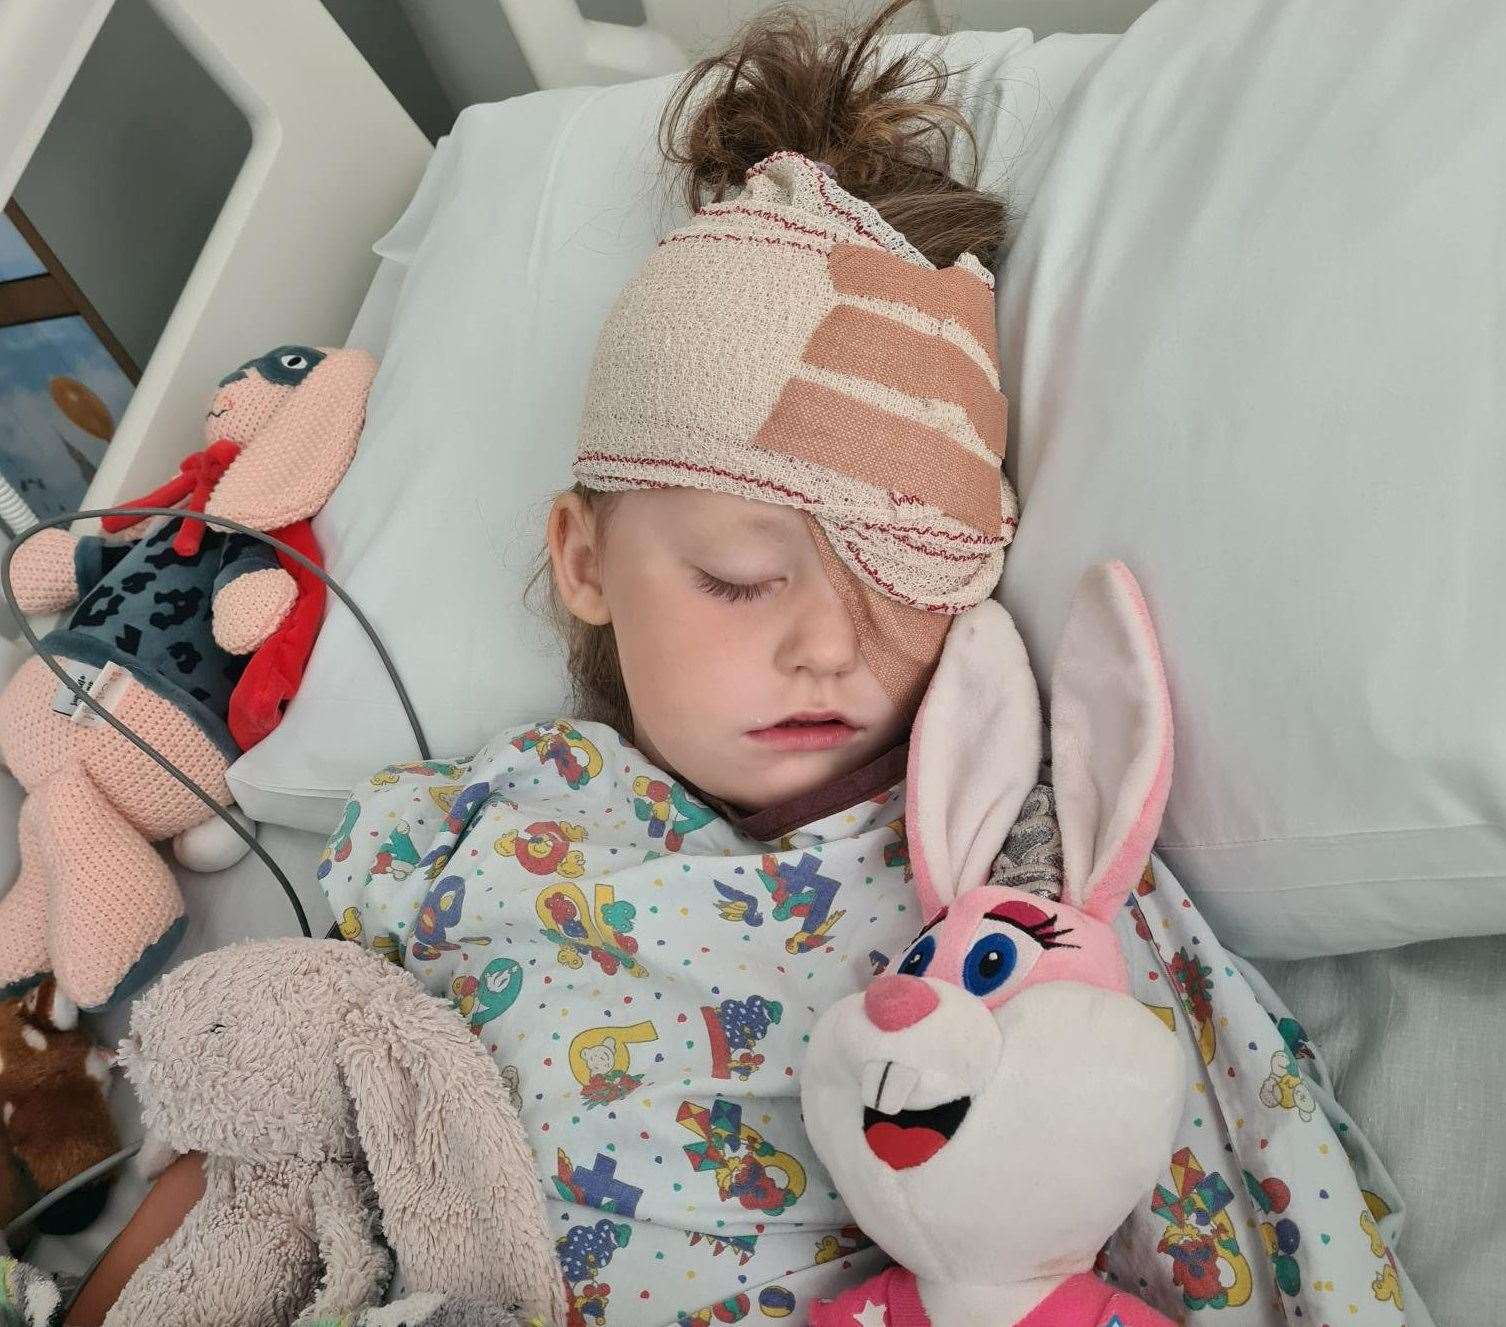 Darcey-Rose Hickson after having her eye removed. Picture: SWNS